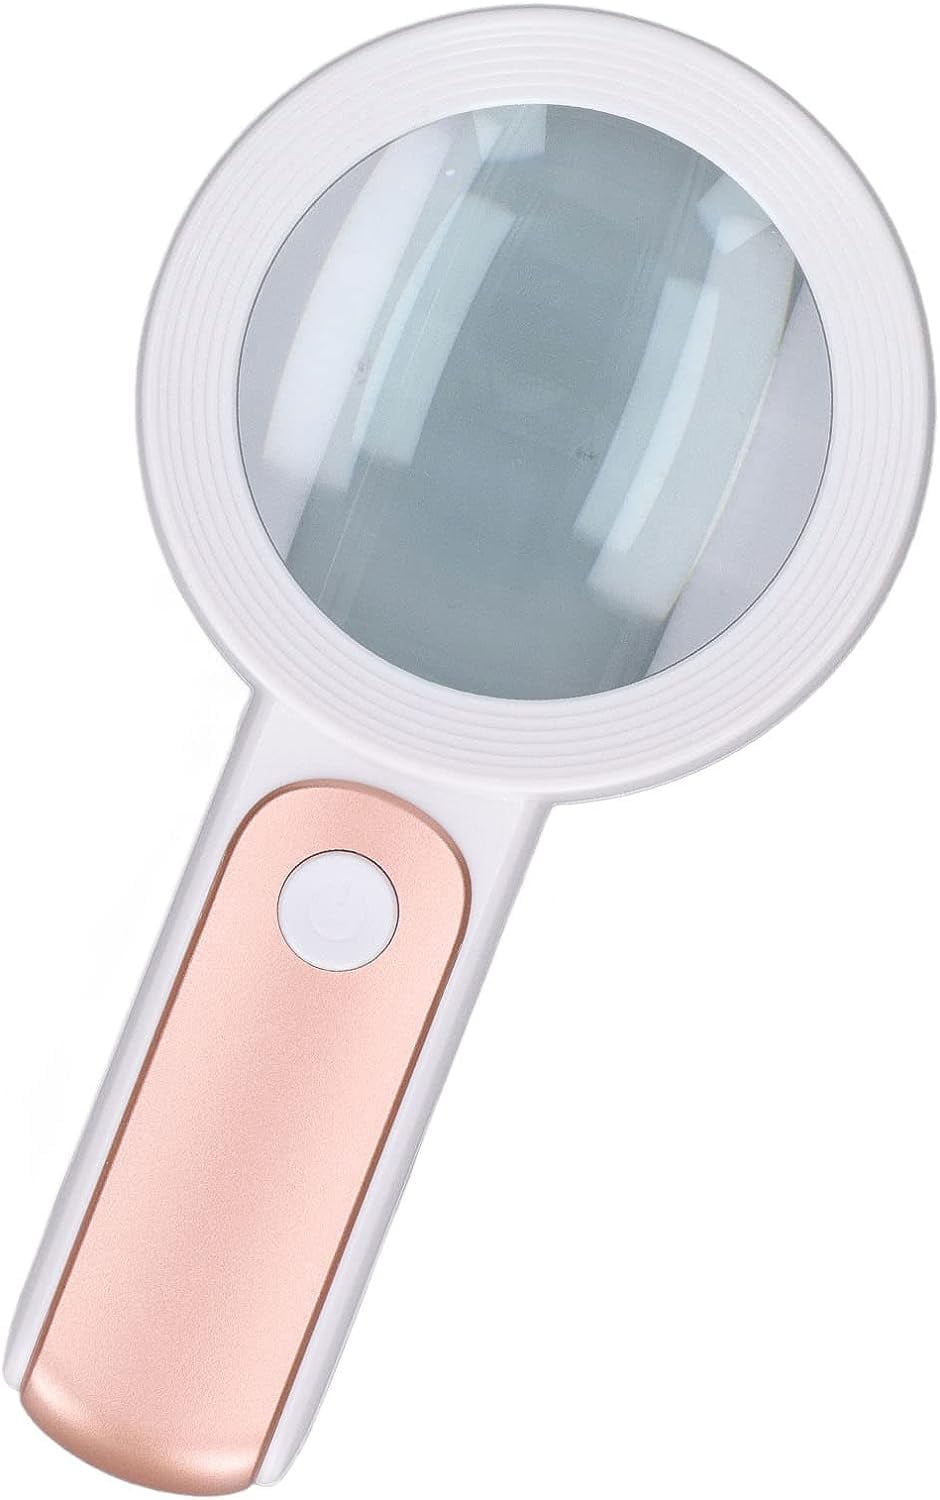 Magnifying Glass Bundle Icon - 1 Graphic by goodcicadaid